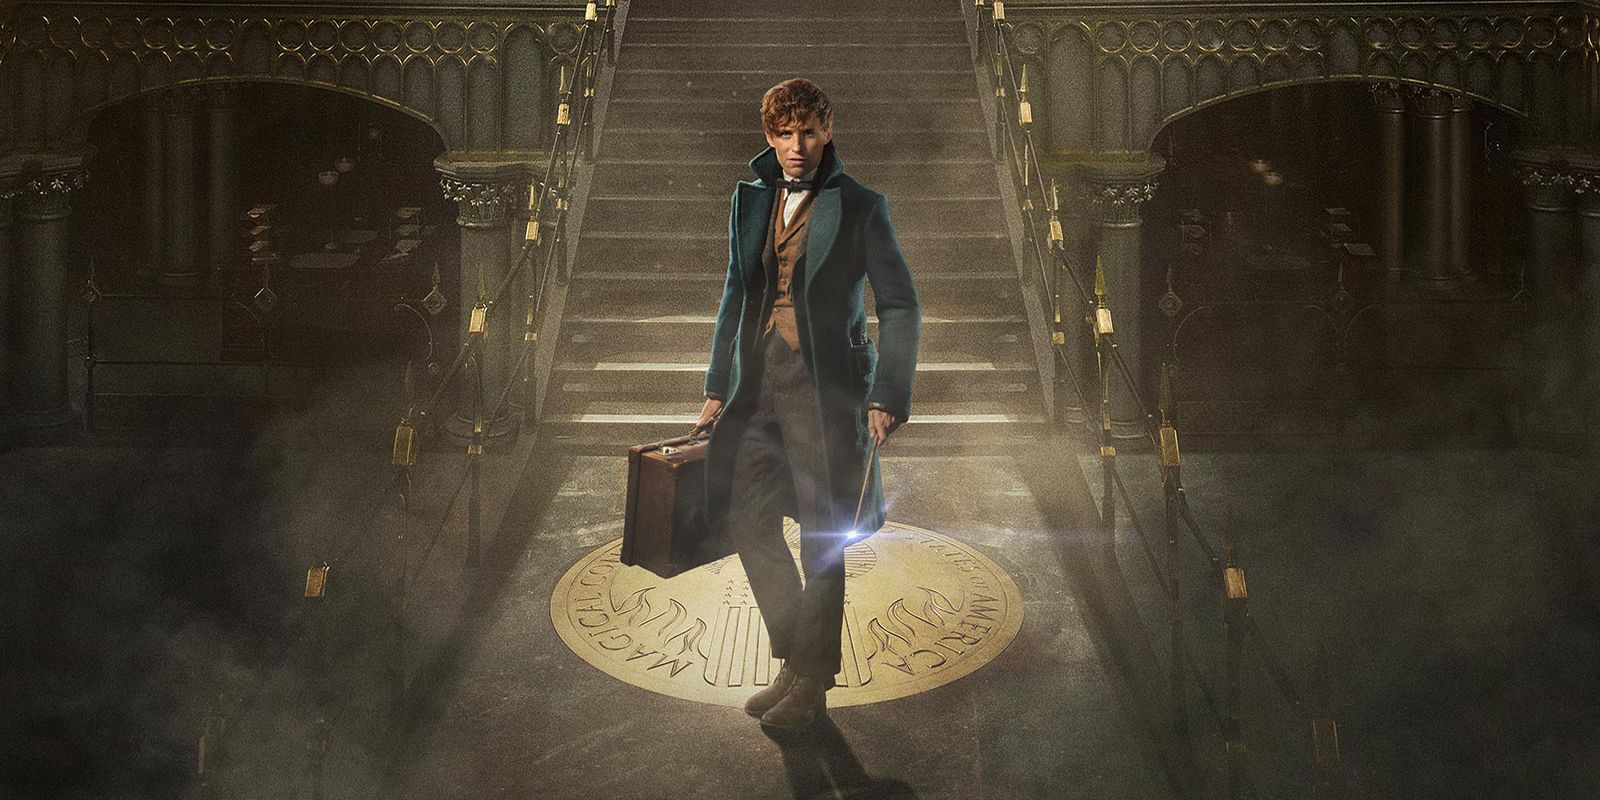 download the new version for windows Fantastic Beasts and Where to Find Them